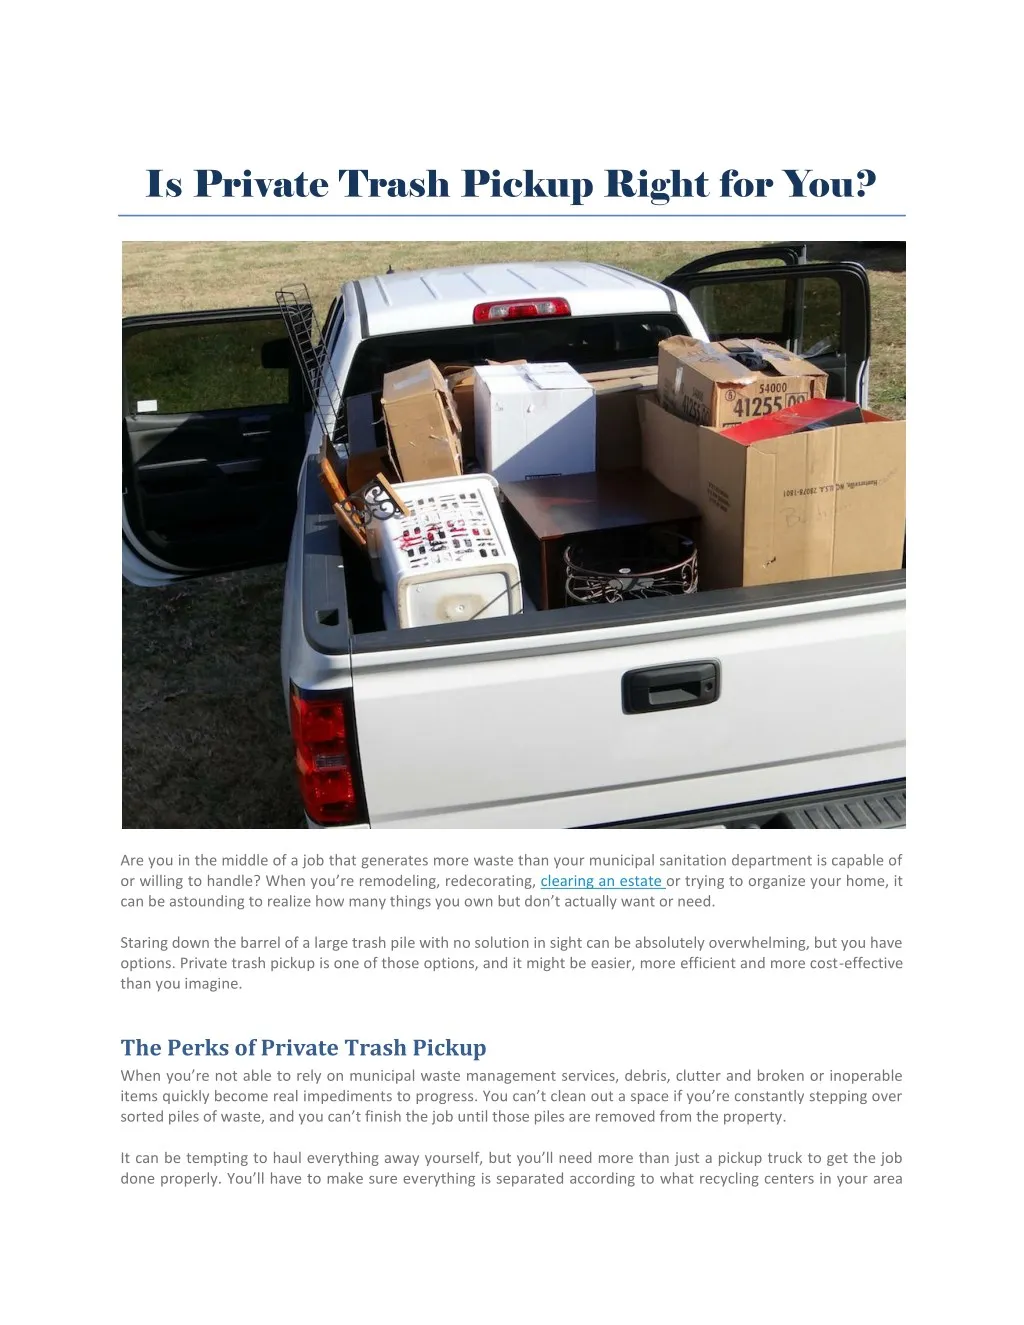 is private trash pickup right for you